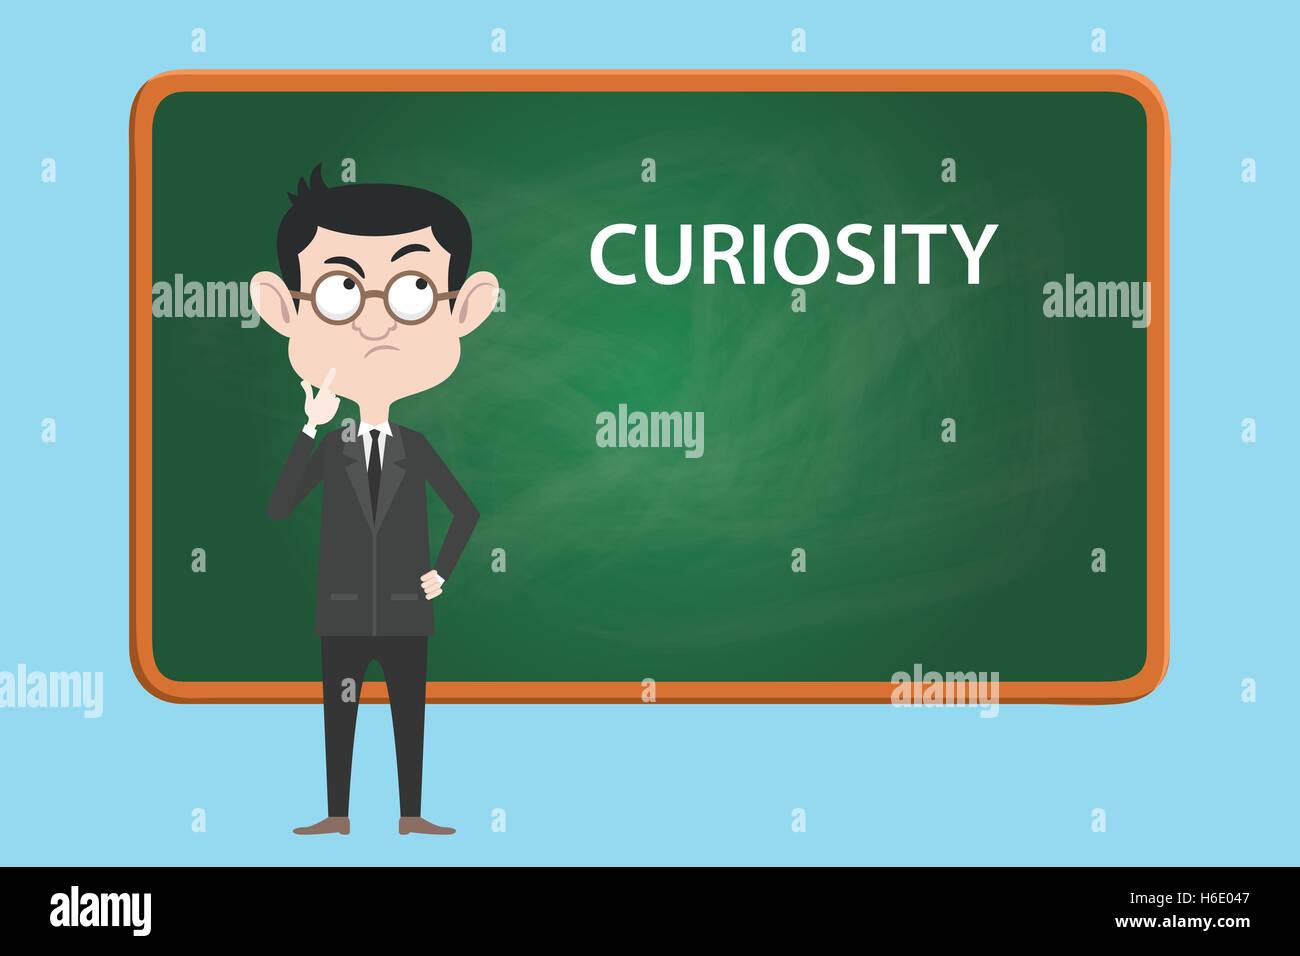 curiosity concept illustration with business man think or curious about something with board as background vector Stock Vector